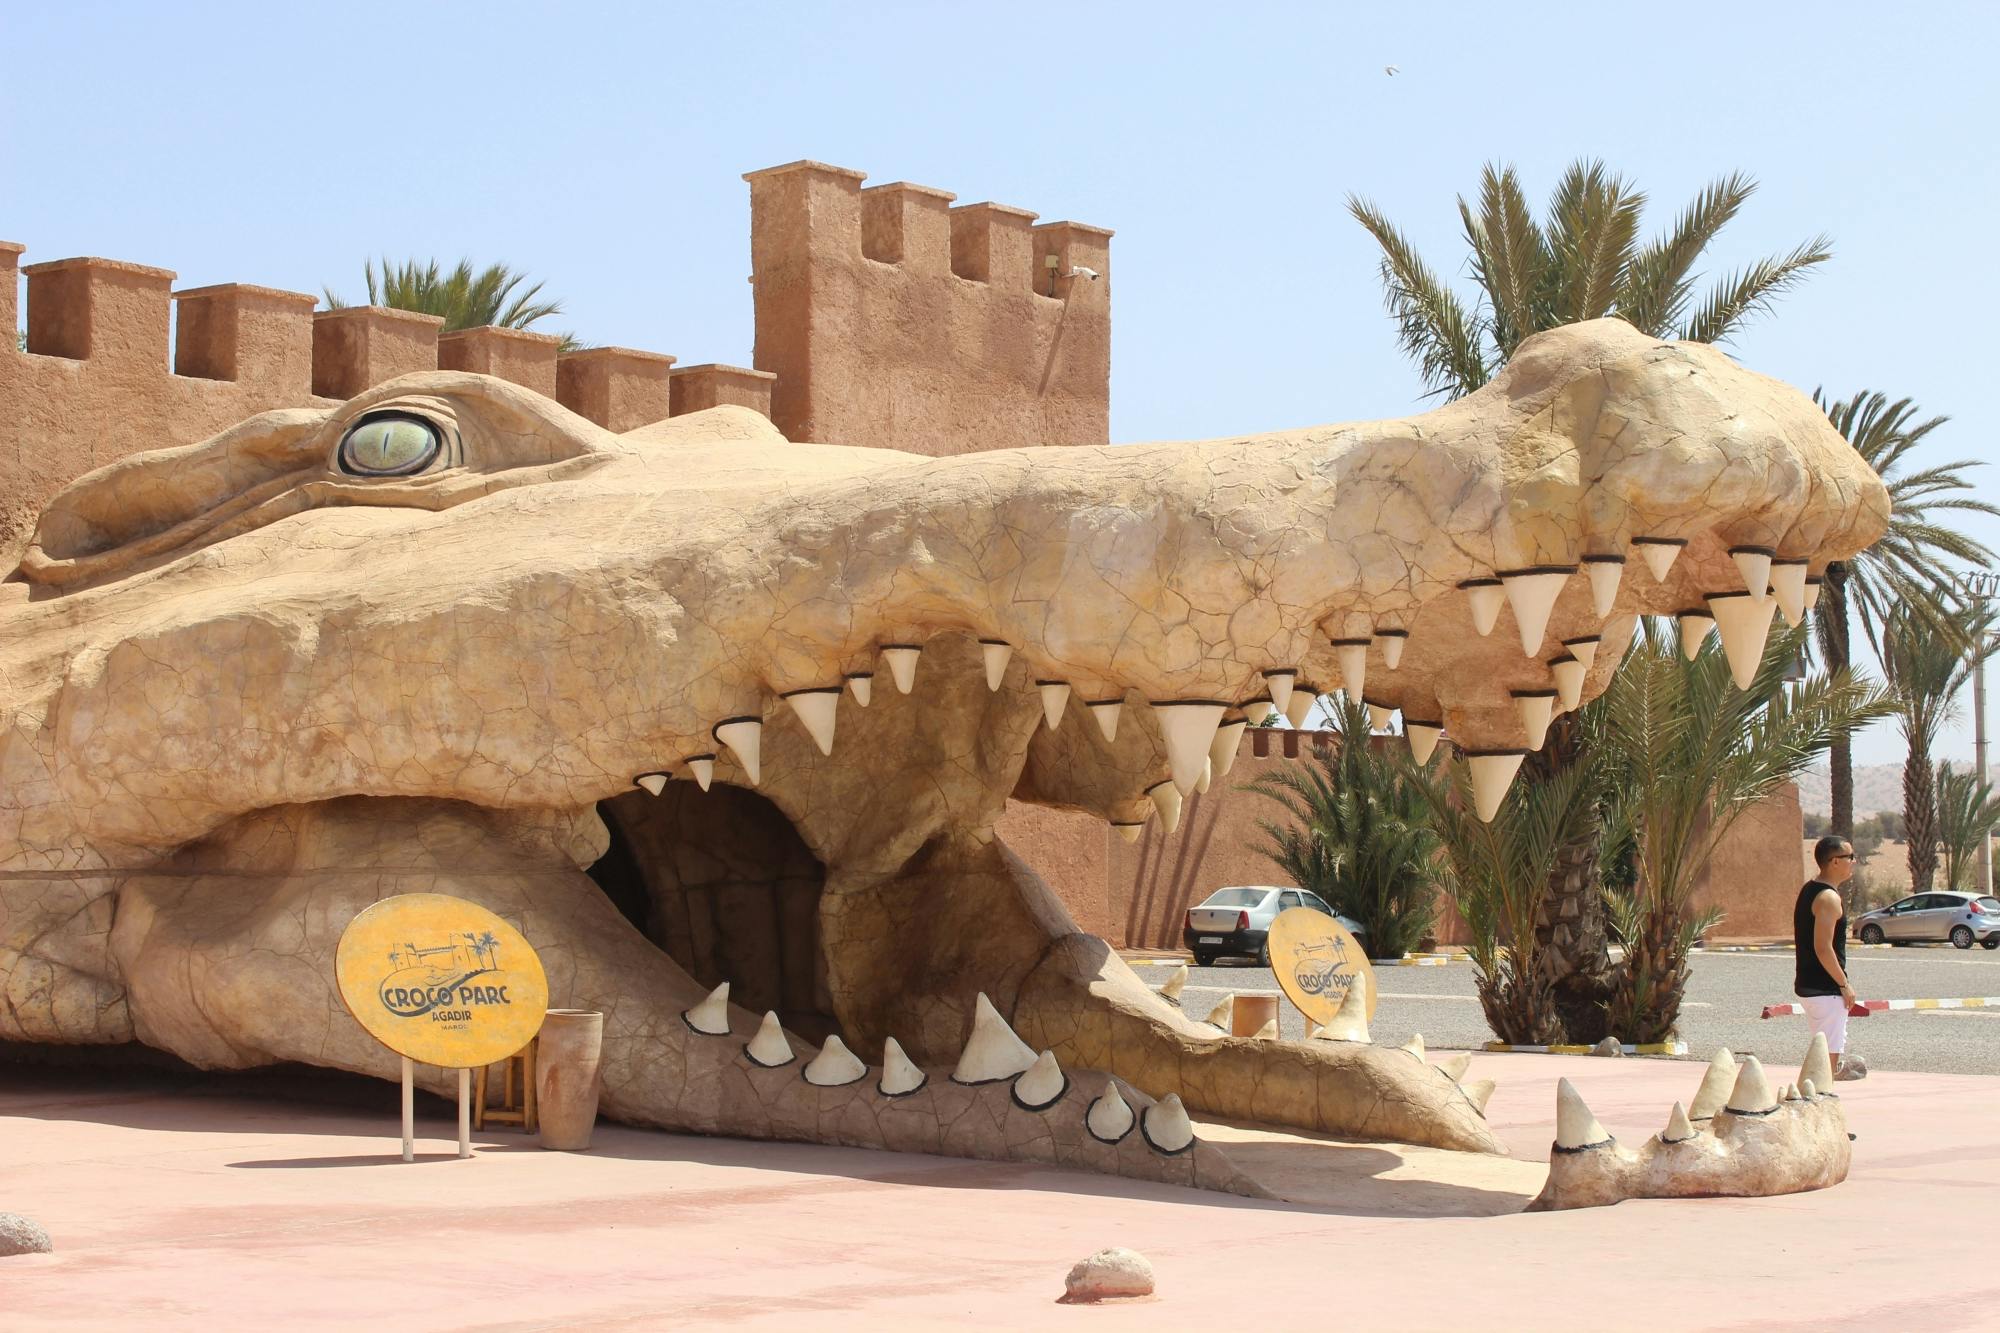 Crocoparc visit from Agadir or Taghazout with entrance fees Musement